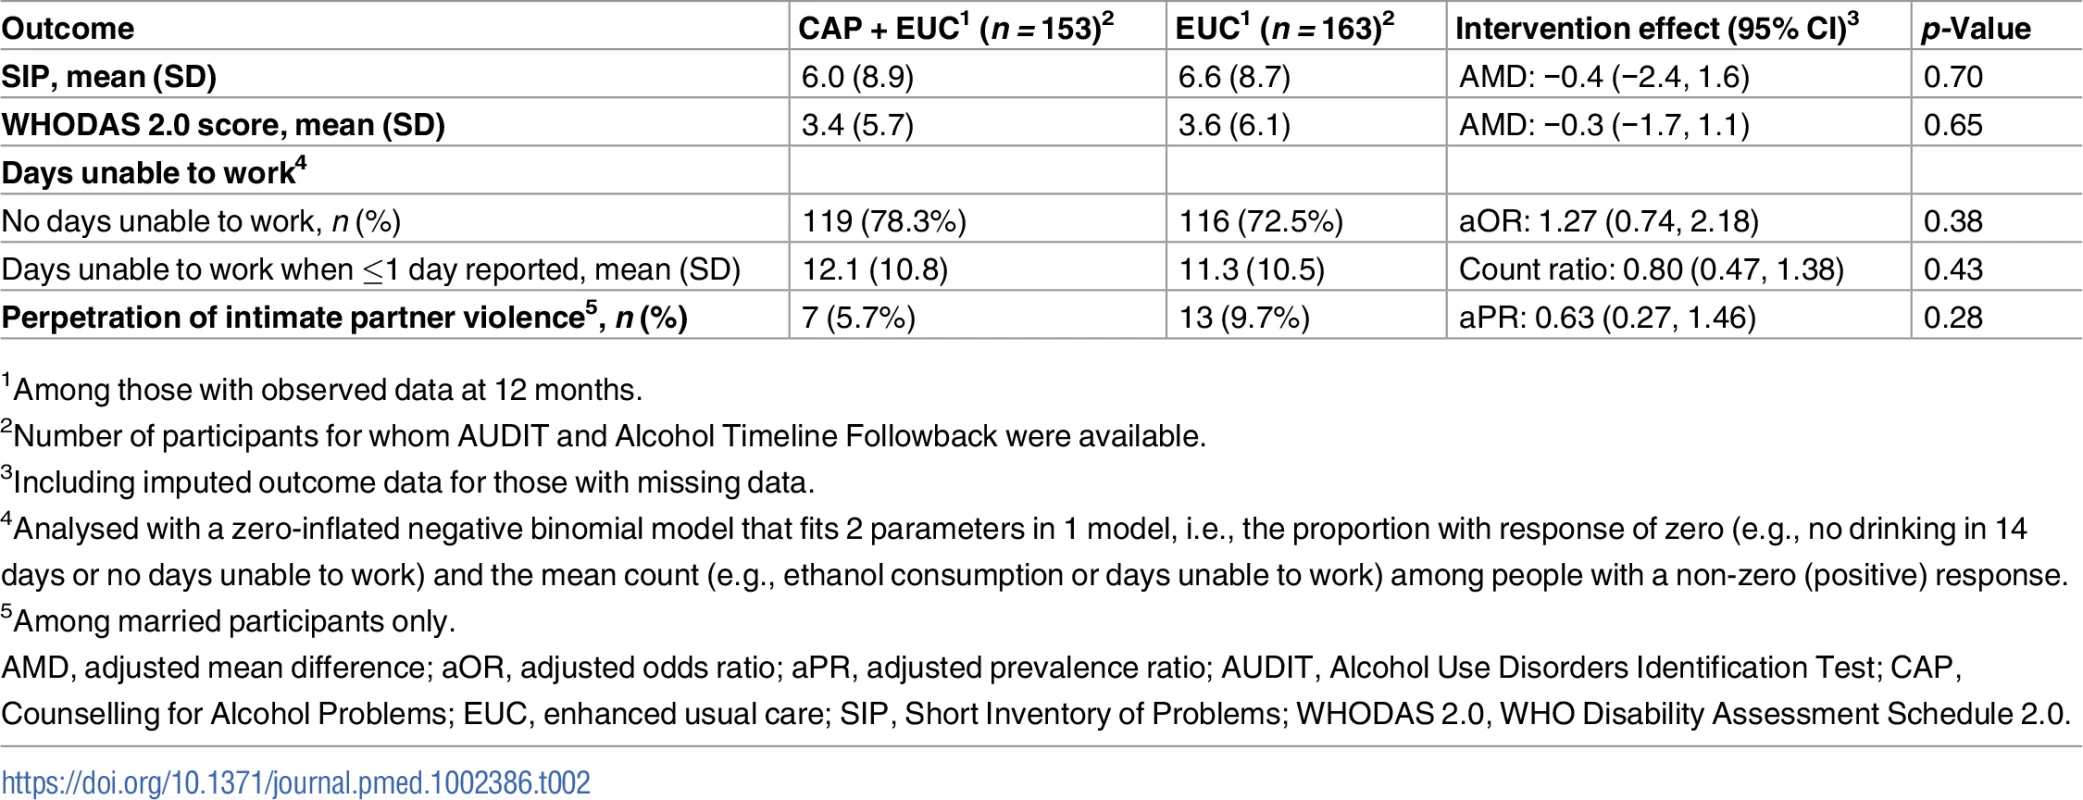 Effect of CAP plus EUC compared with EUC alone on impact of harmful drinking, disability and intimate partner violence at 12 months.